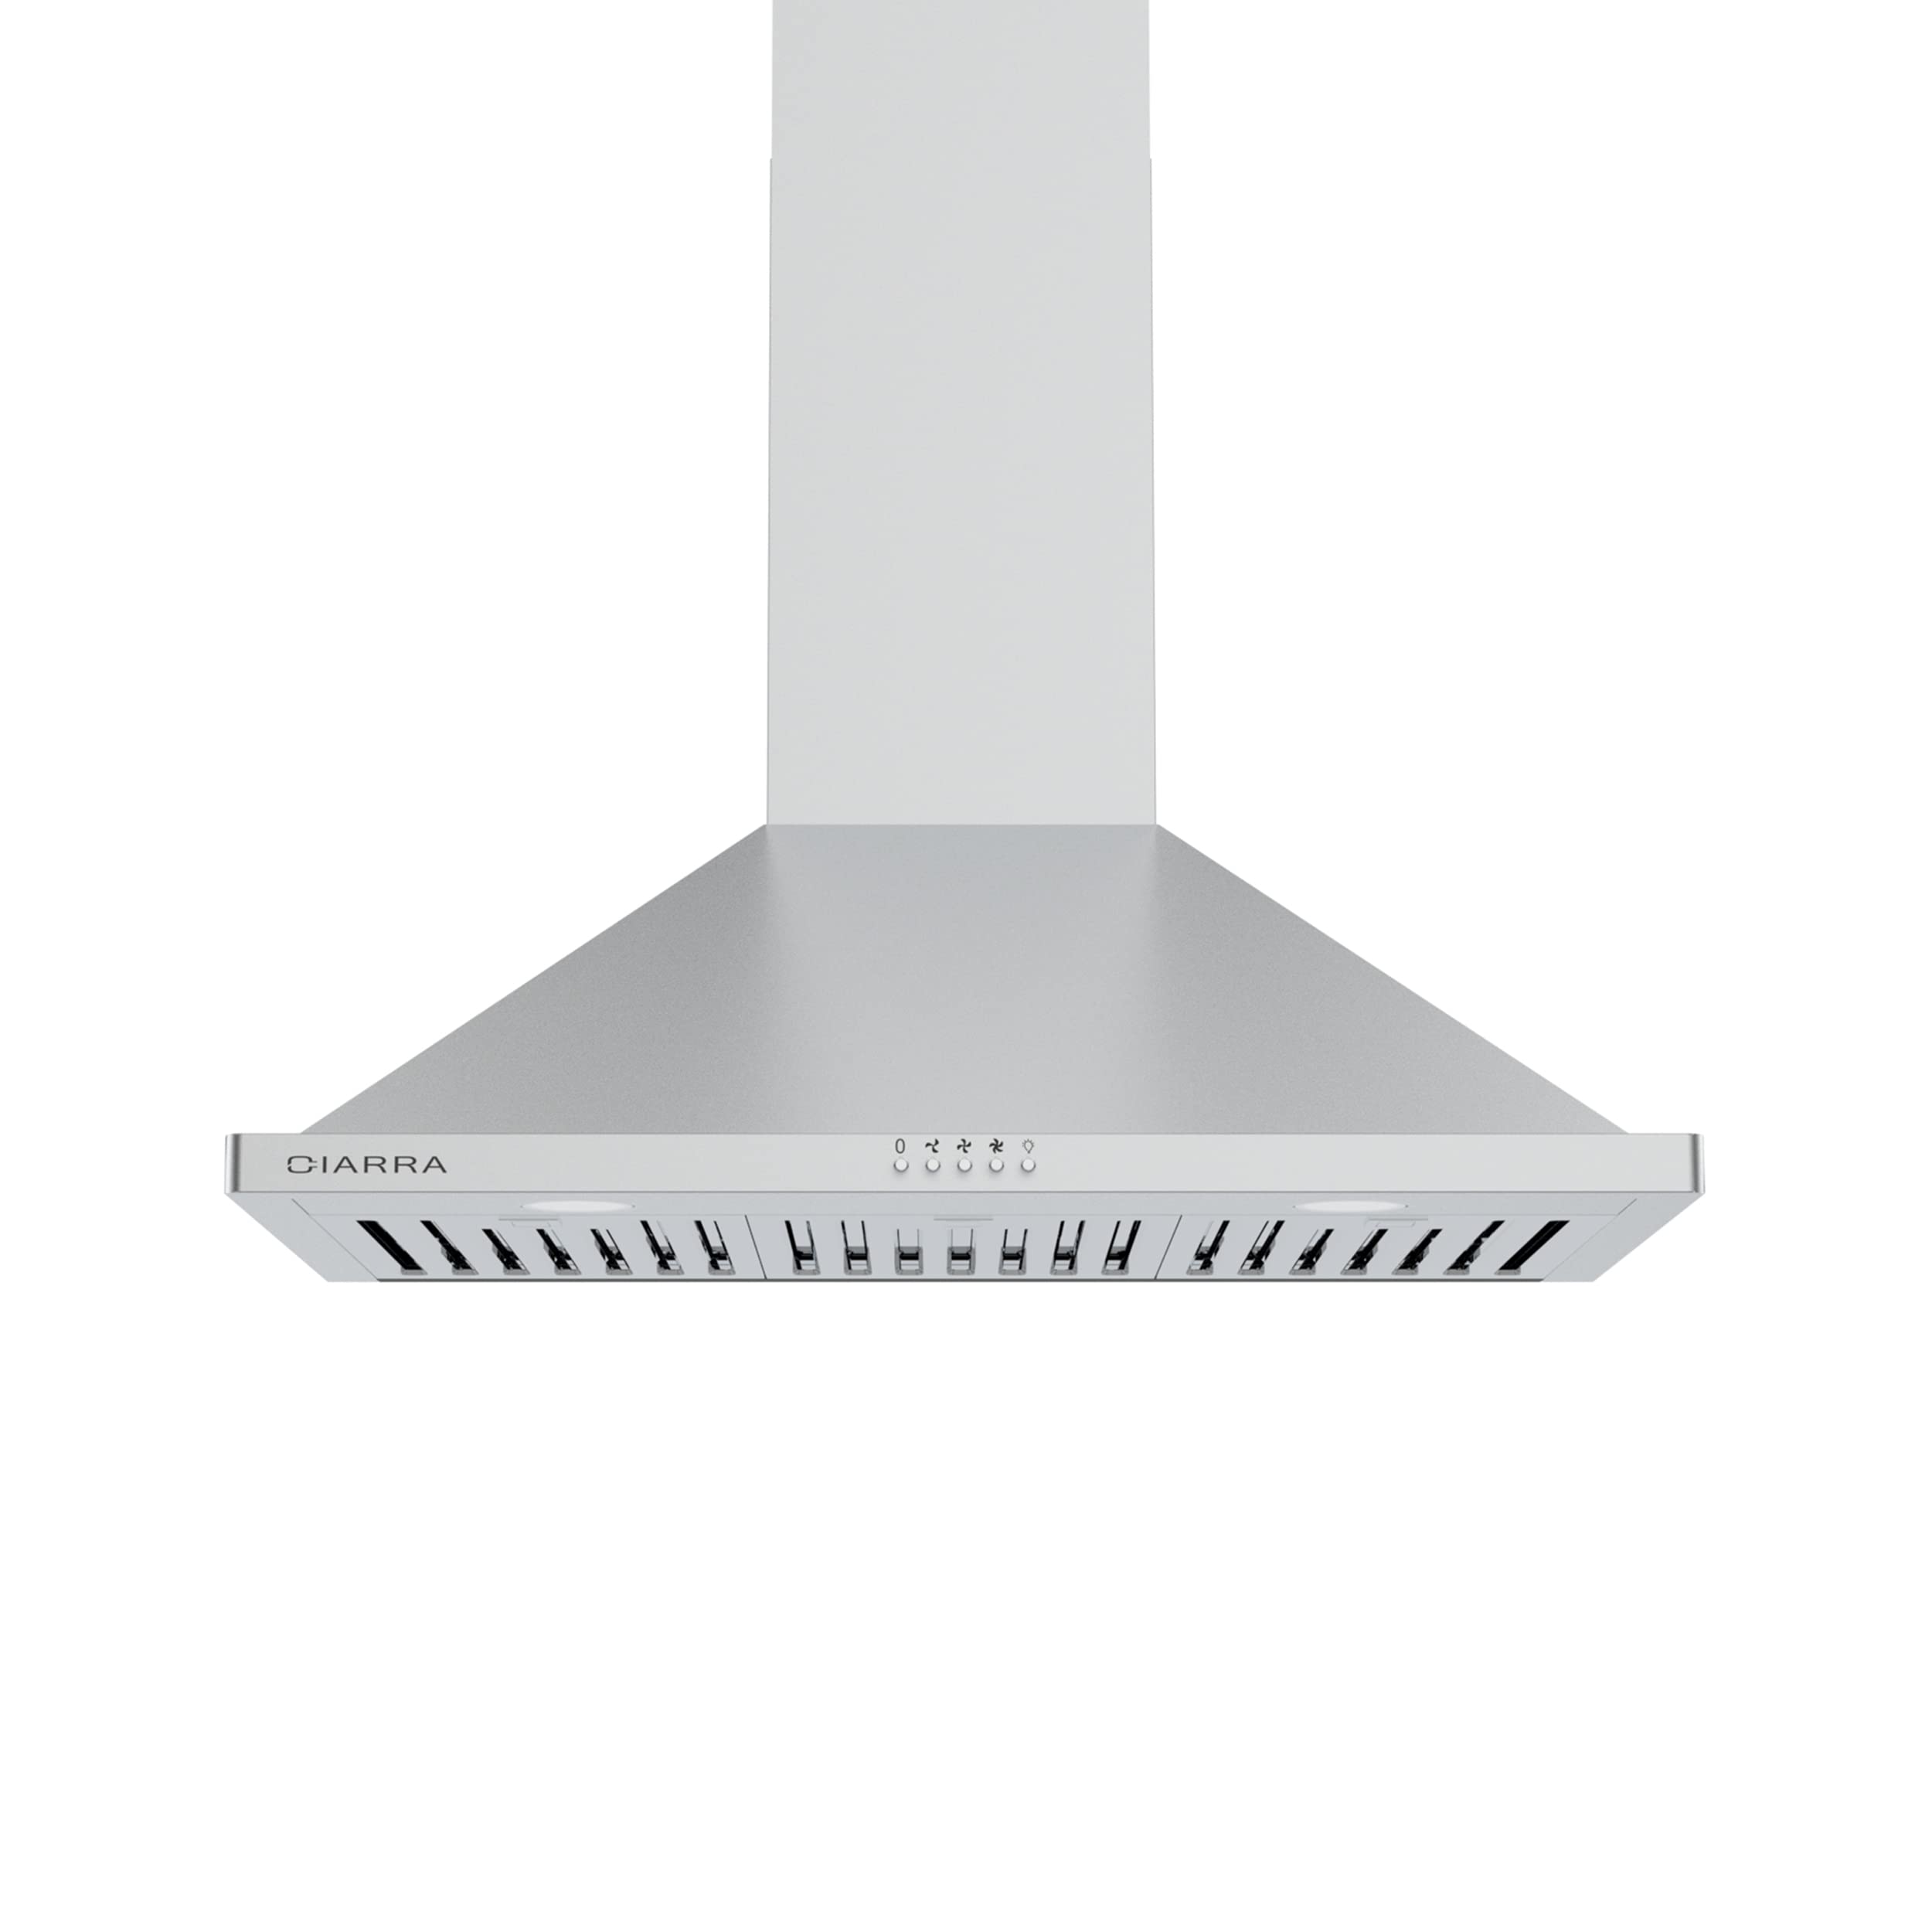 CIARRA Ductless Range Hood 30 inch 450 cFM Wall Mount Vent Hood for Stove with Permanent Filter, 3 Speed Fan in Stainless Steel cIARRA 